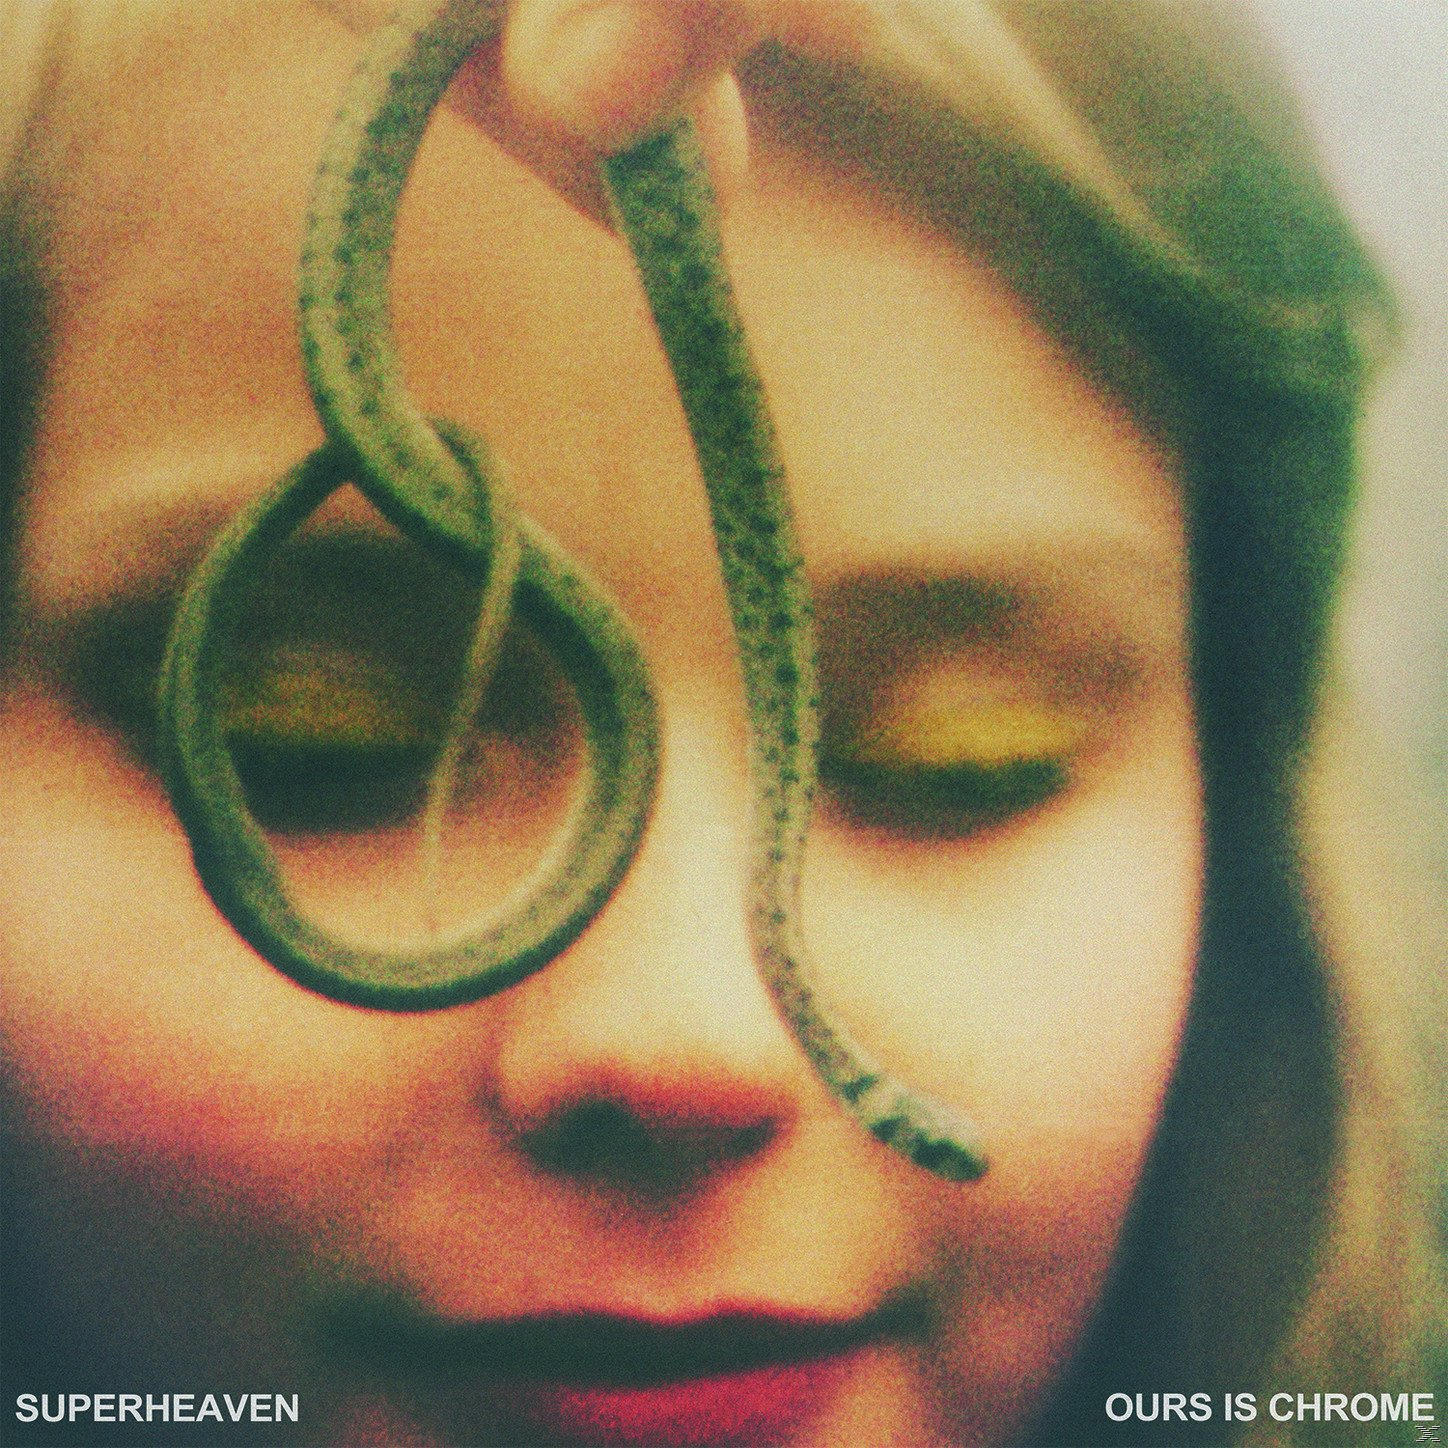 Superheaven - Ours (CD) Is - Chrome